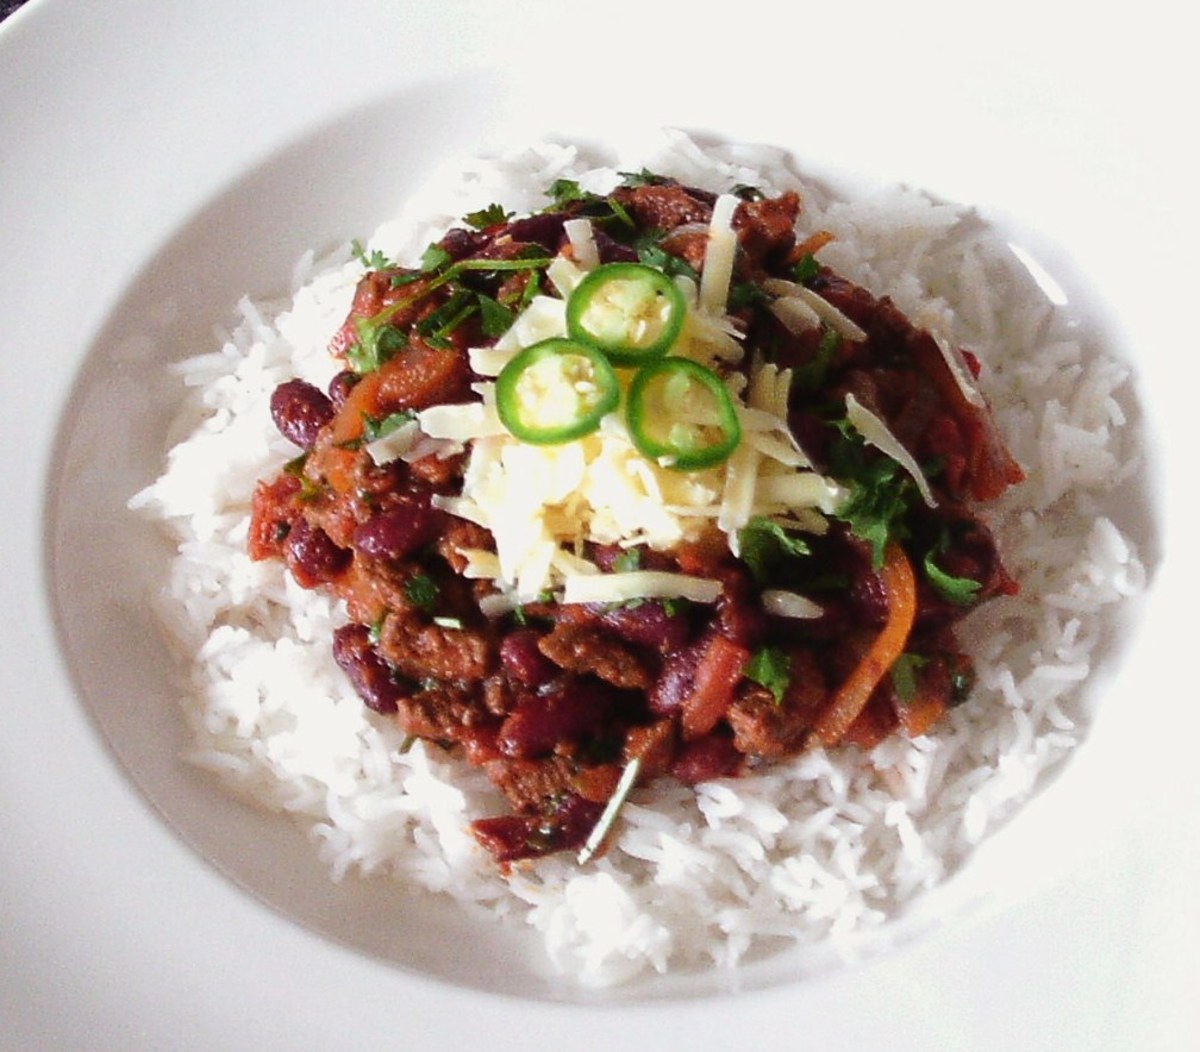 Kangaroo chilli is one of the recipes featured on this page